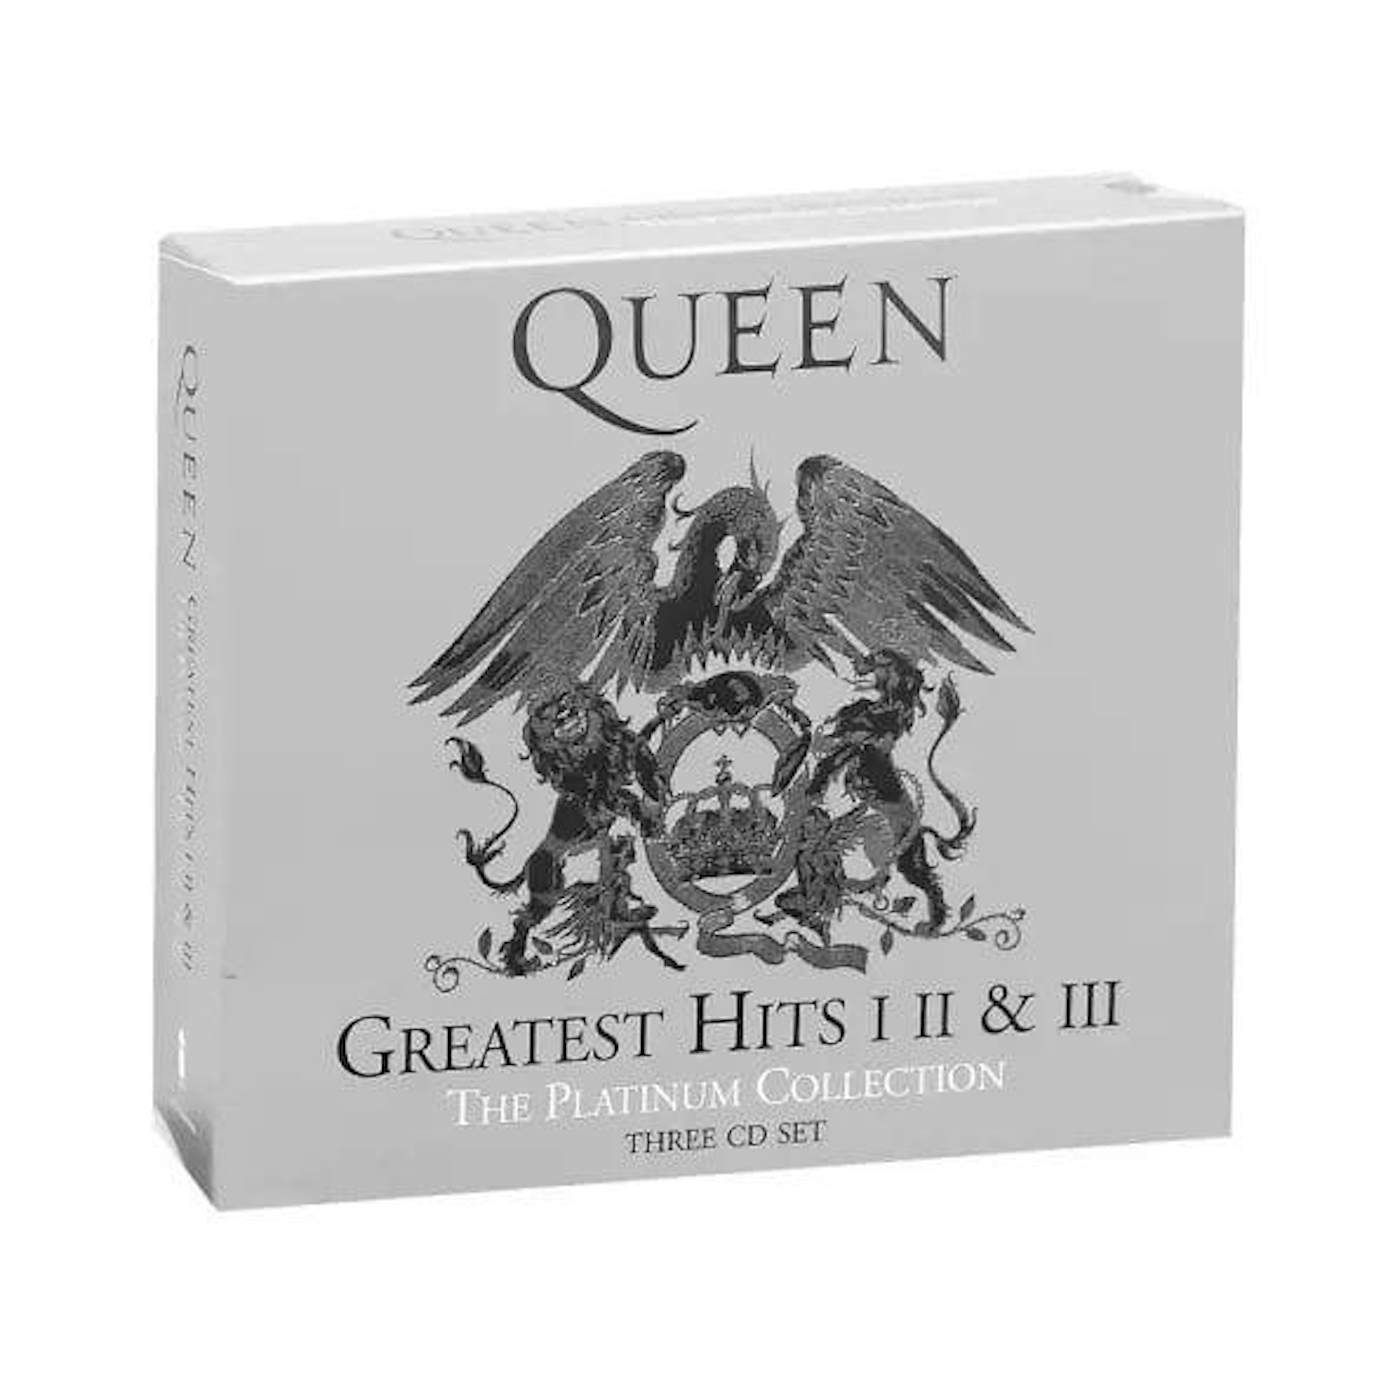 Greatest hits collection. Queen. The Platinum collection. Greatest Hits i, II & III (3 CD). Queen Greatest Hits i II III the Platinum collection. Queen Greatest Hits i II & III the Platinum collection 3 CD Set. Queen Greatest Hits 1 2 3 Platinum collection.